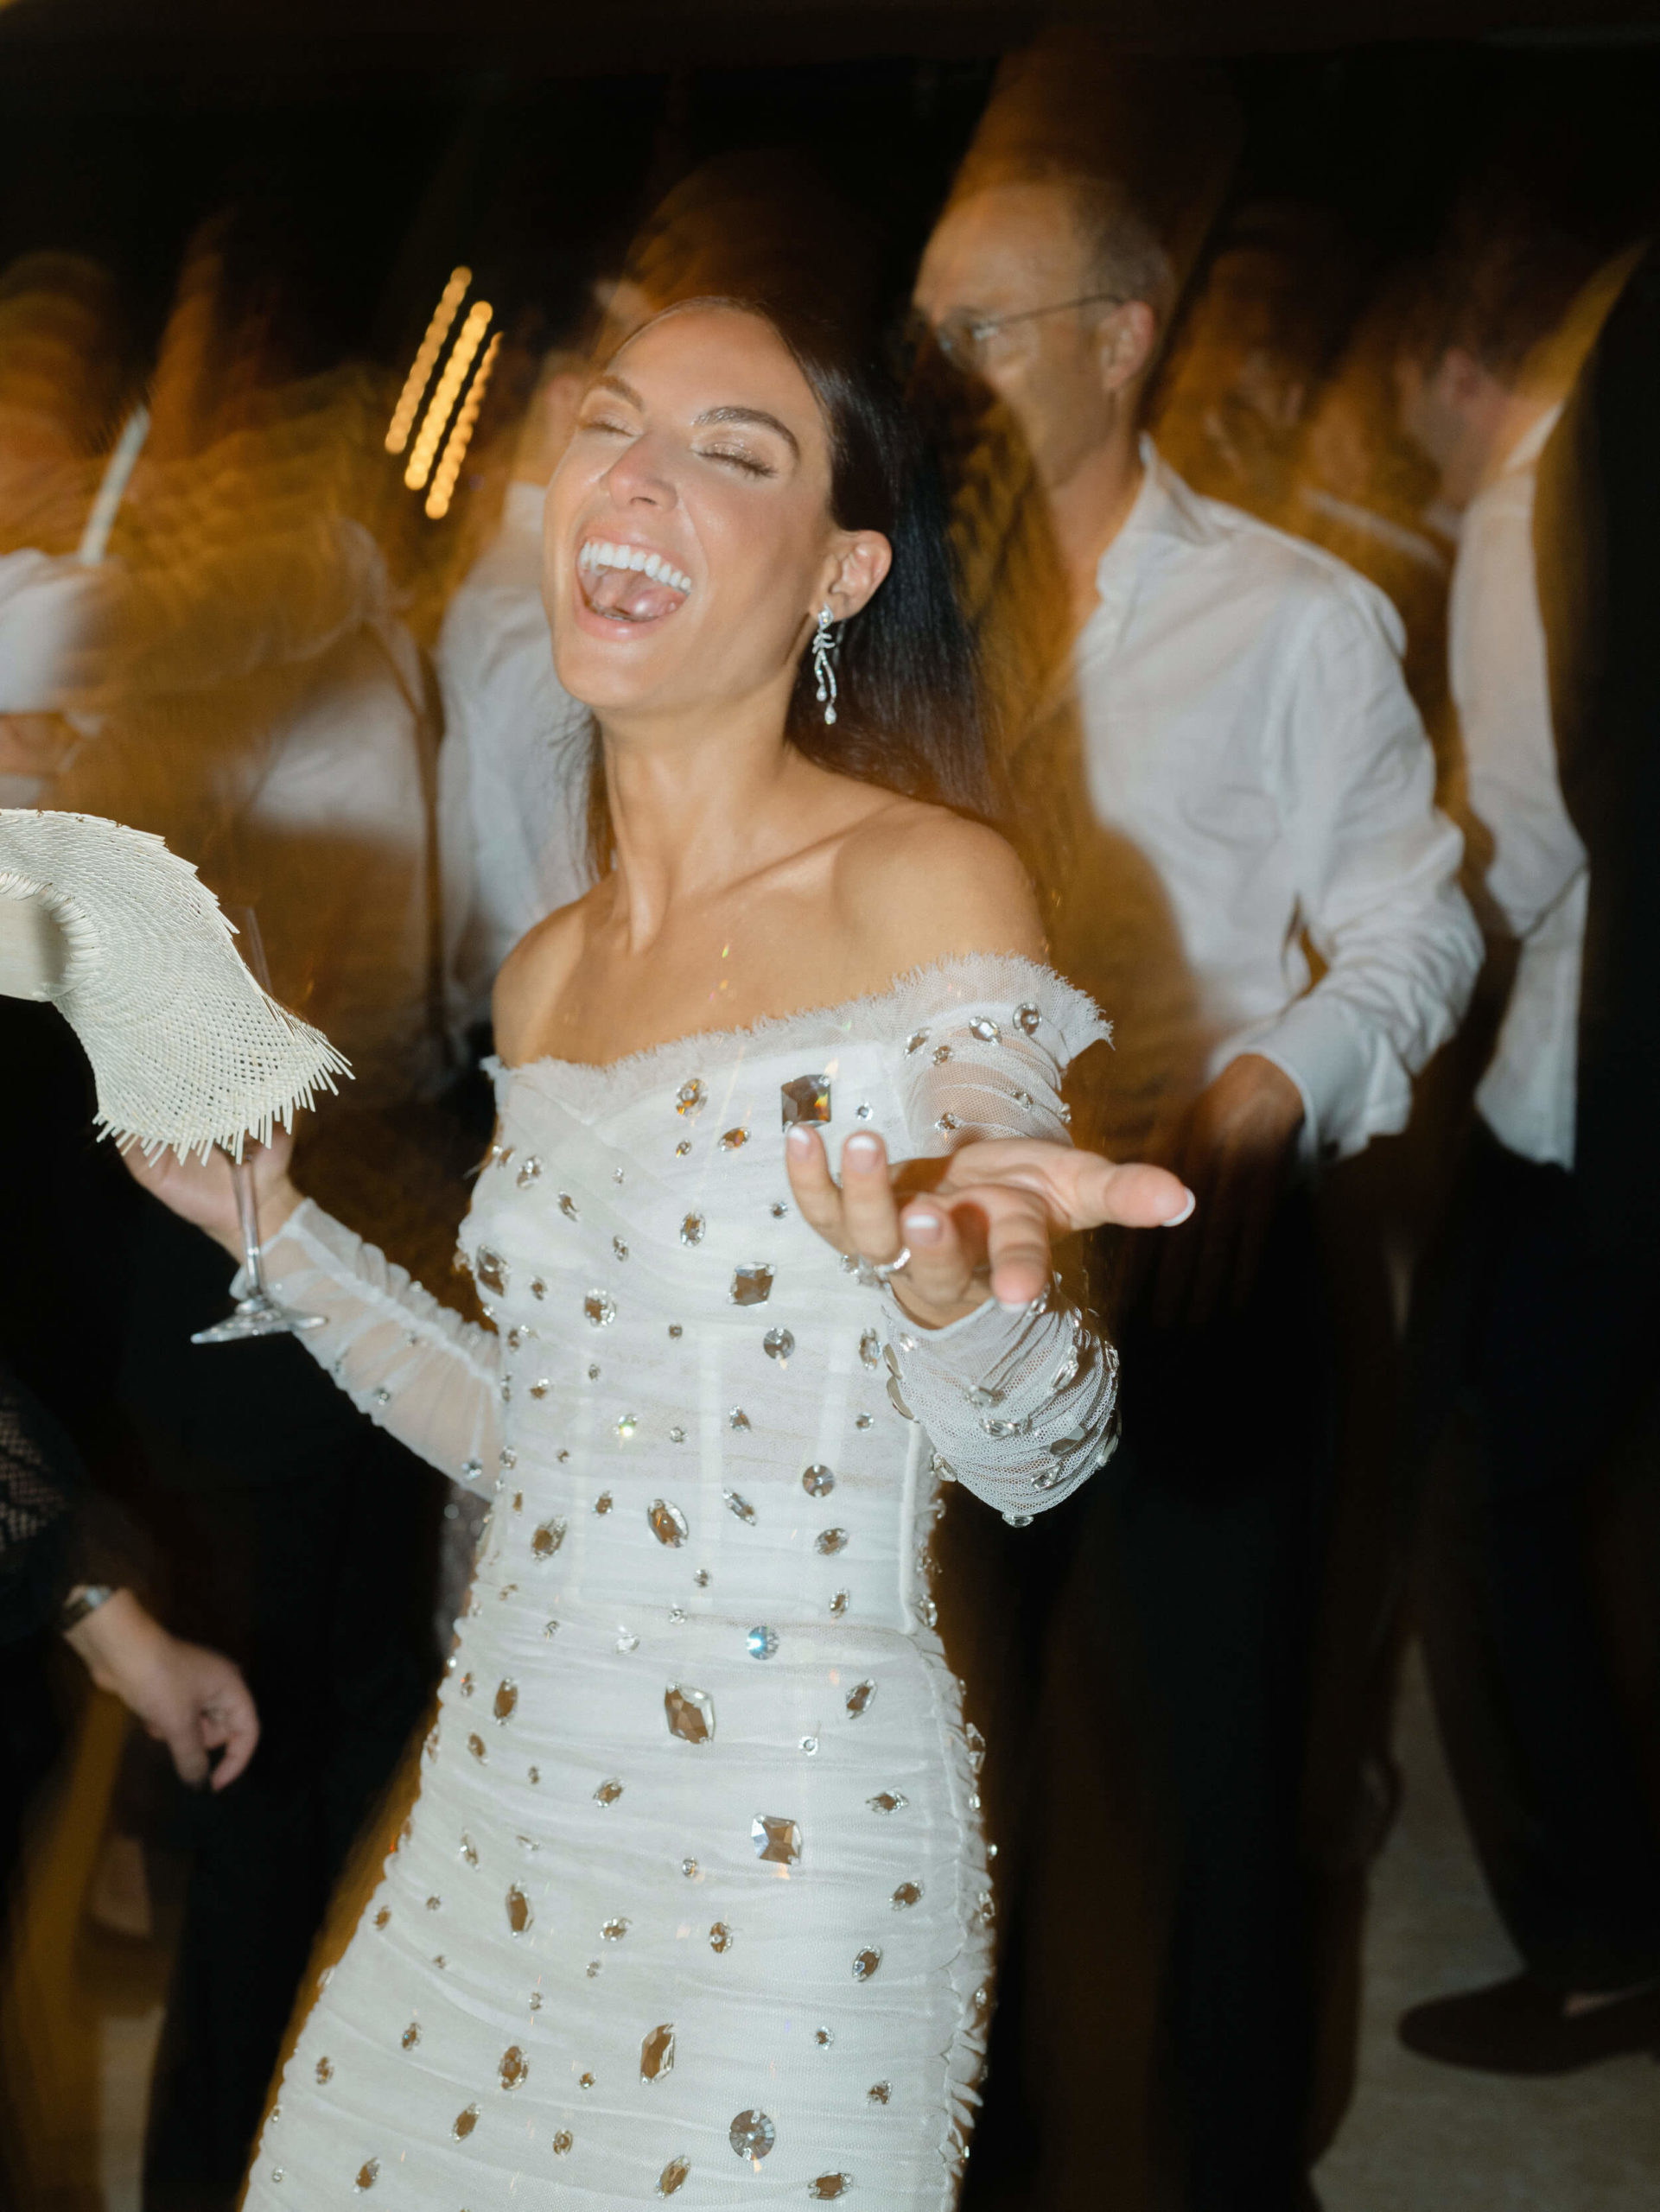 Danielle dancing and laughing at her wedding reception